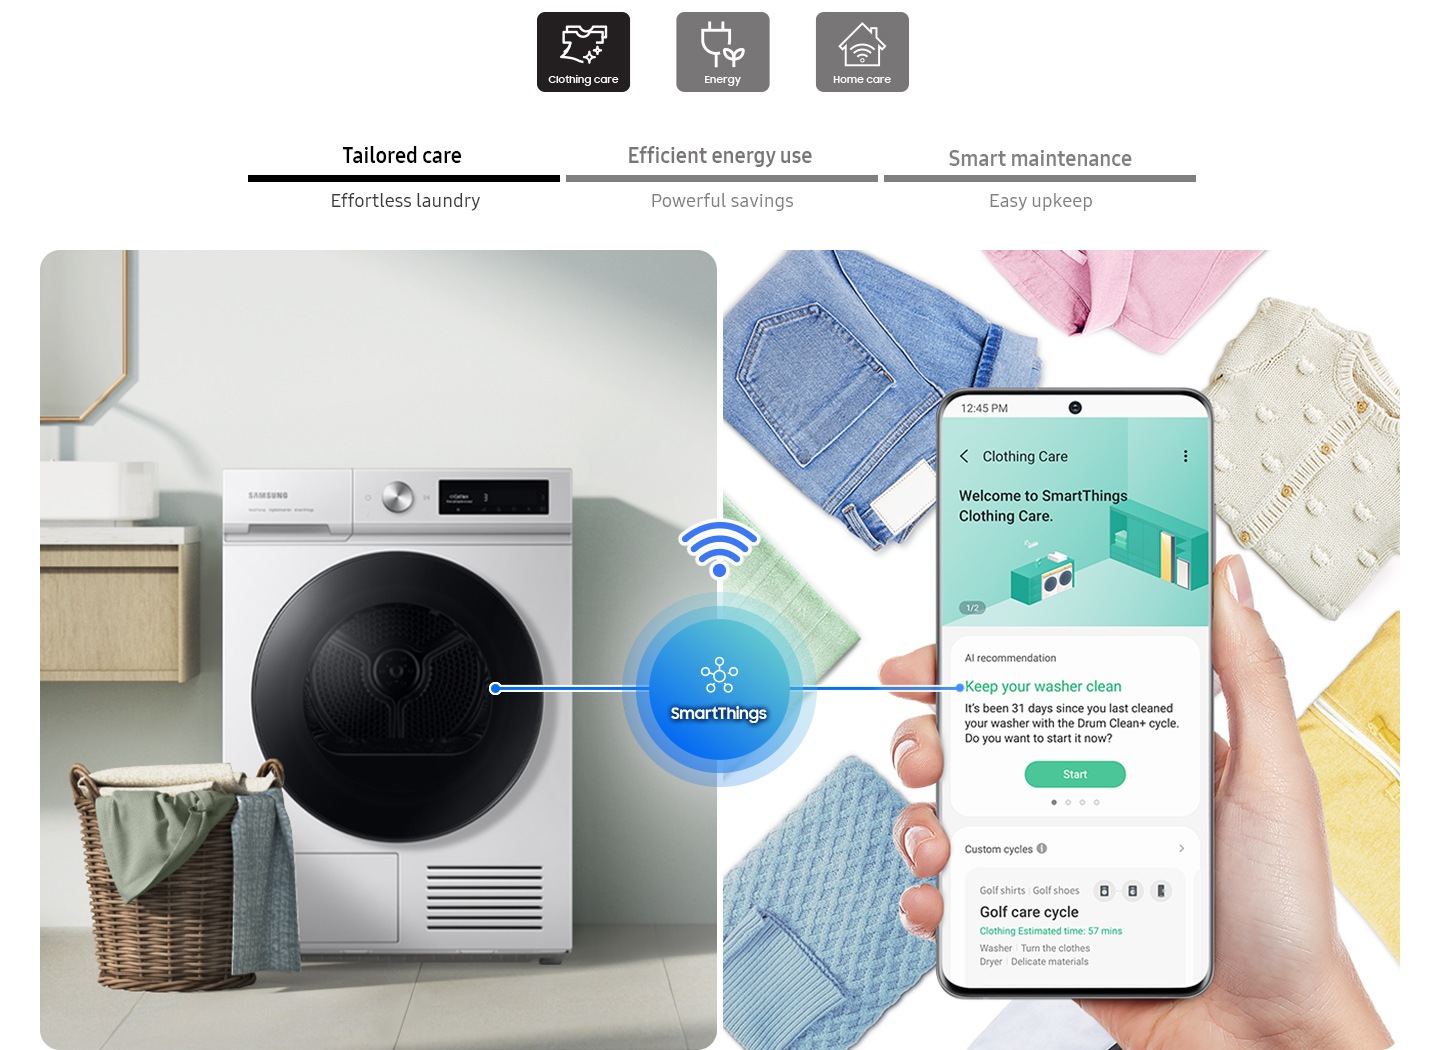 The SmartThings app helps Tailored care, Efficient energy use, Smart maintenance.  Clothing Care displays AI recommendations for effortless laundry, Energy notifies best rates based on personal usage for powerful saving, Home Care help easy upkeep the drying machine maintenance.